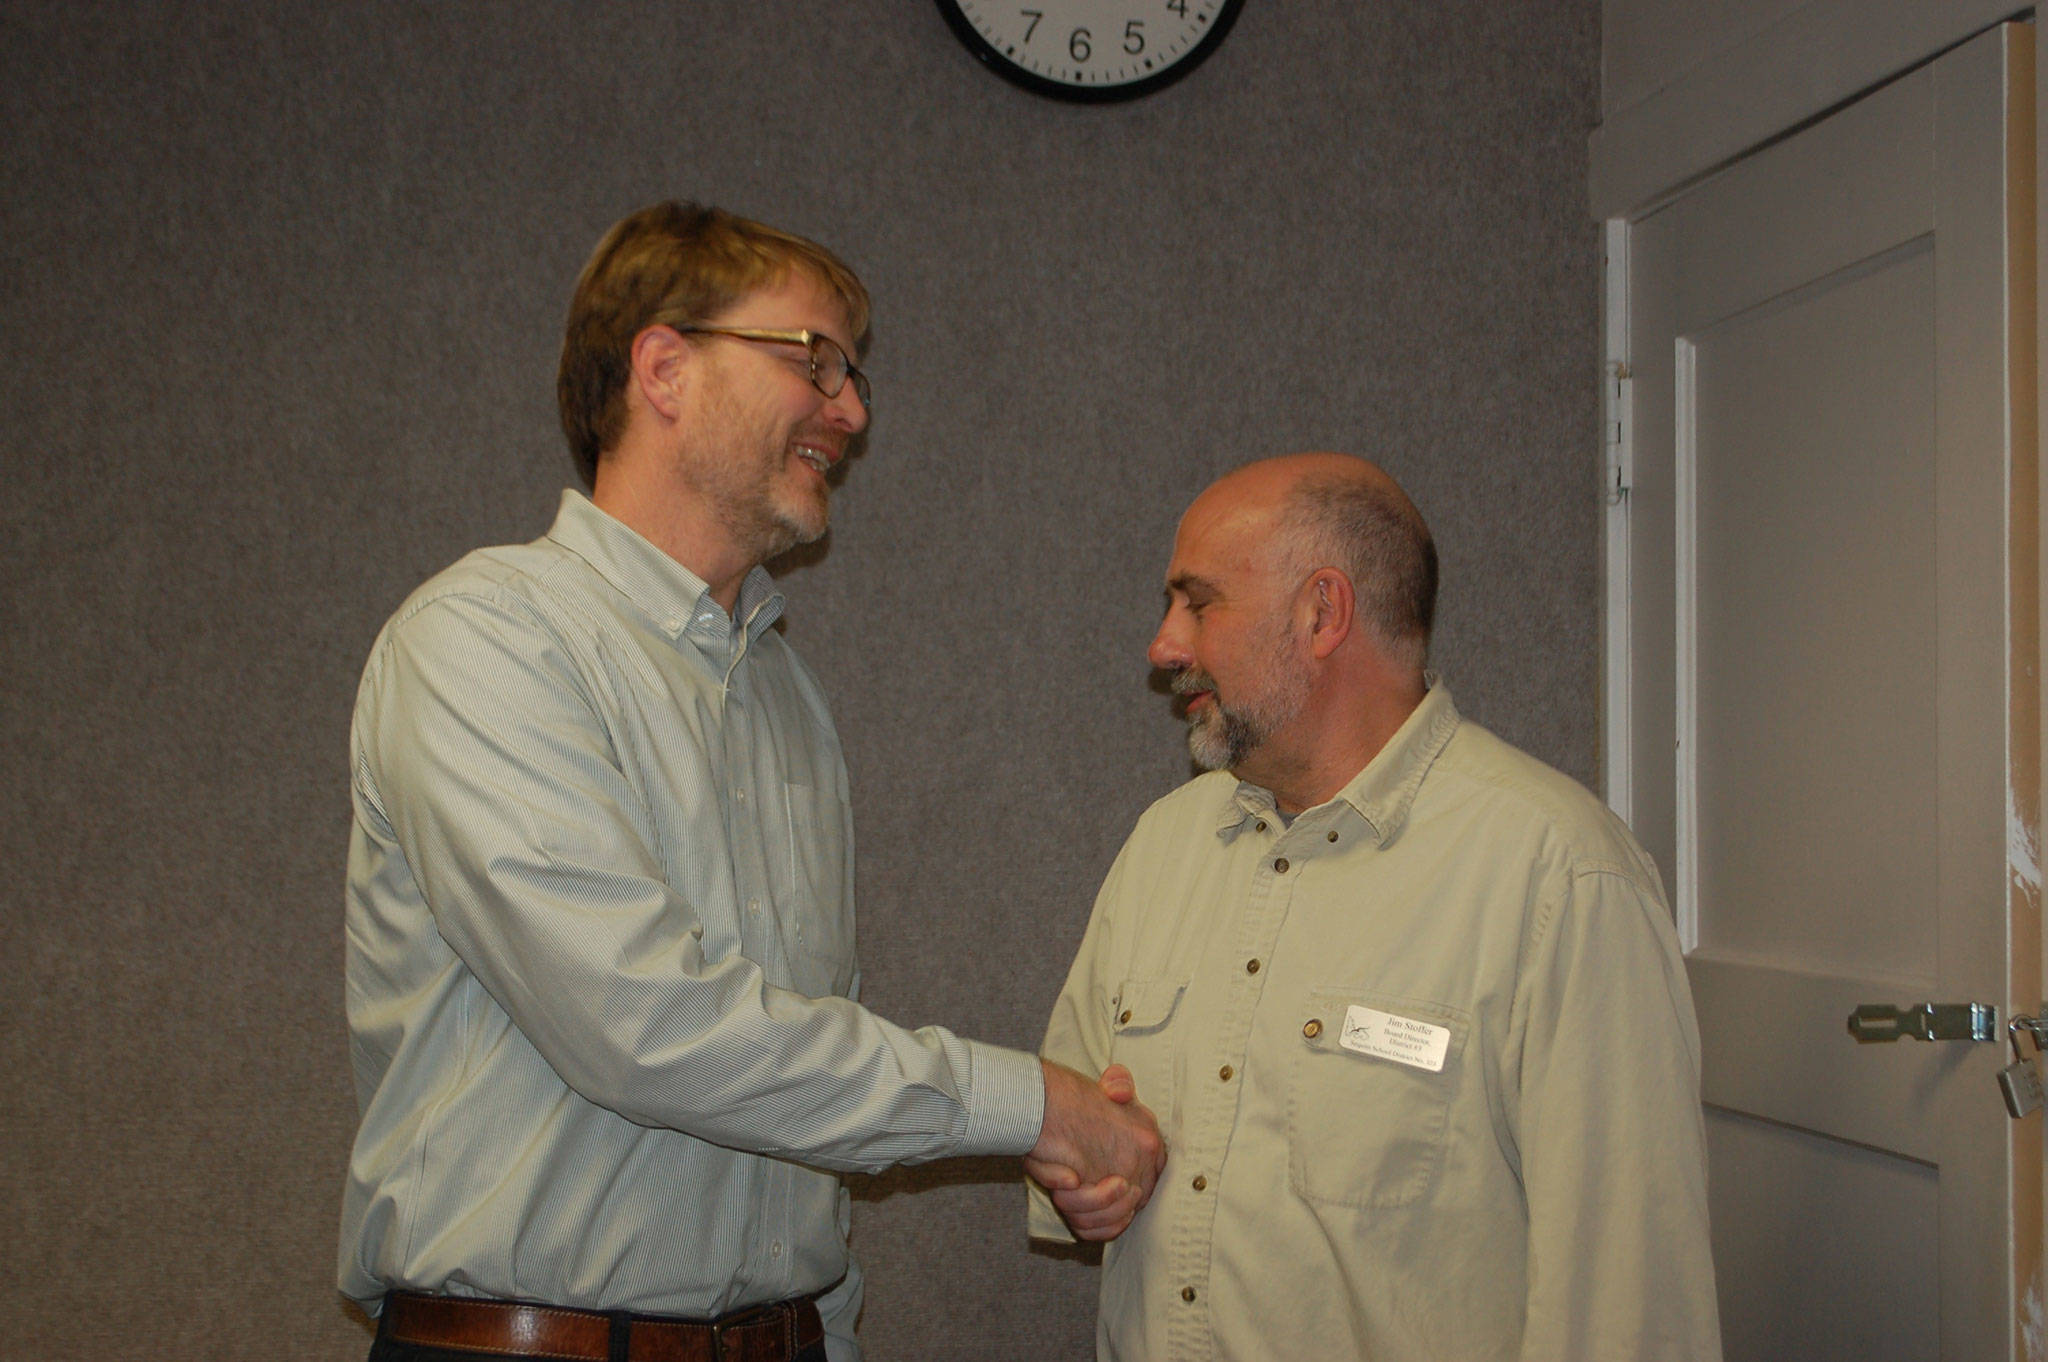 Sequim Education Association member and Sequim High School teacher Jon Eekhoff shakes hands with school board director Jim Stoffer after the board meeting on Oct. 16 where the board approved the collective bargaining agreement for Sequim teachers. Sequim Gazette photo by Erin Hawkins